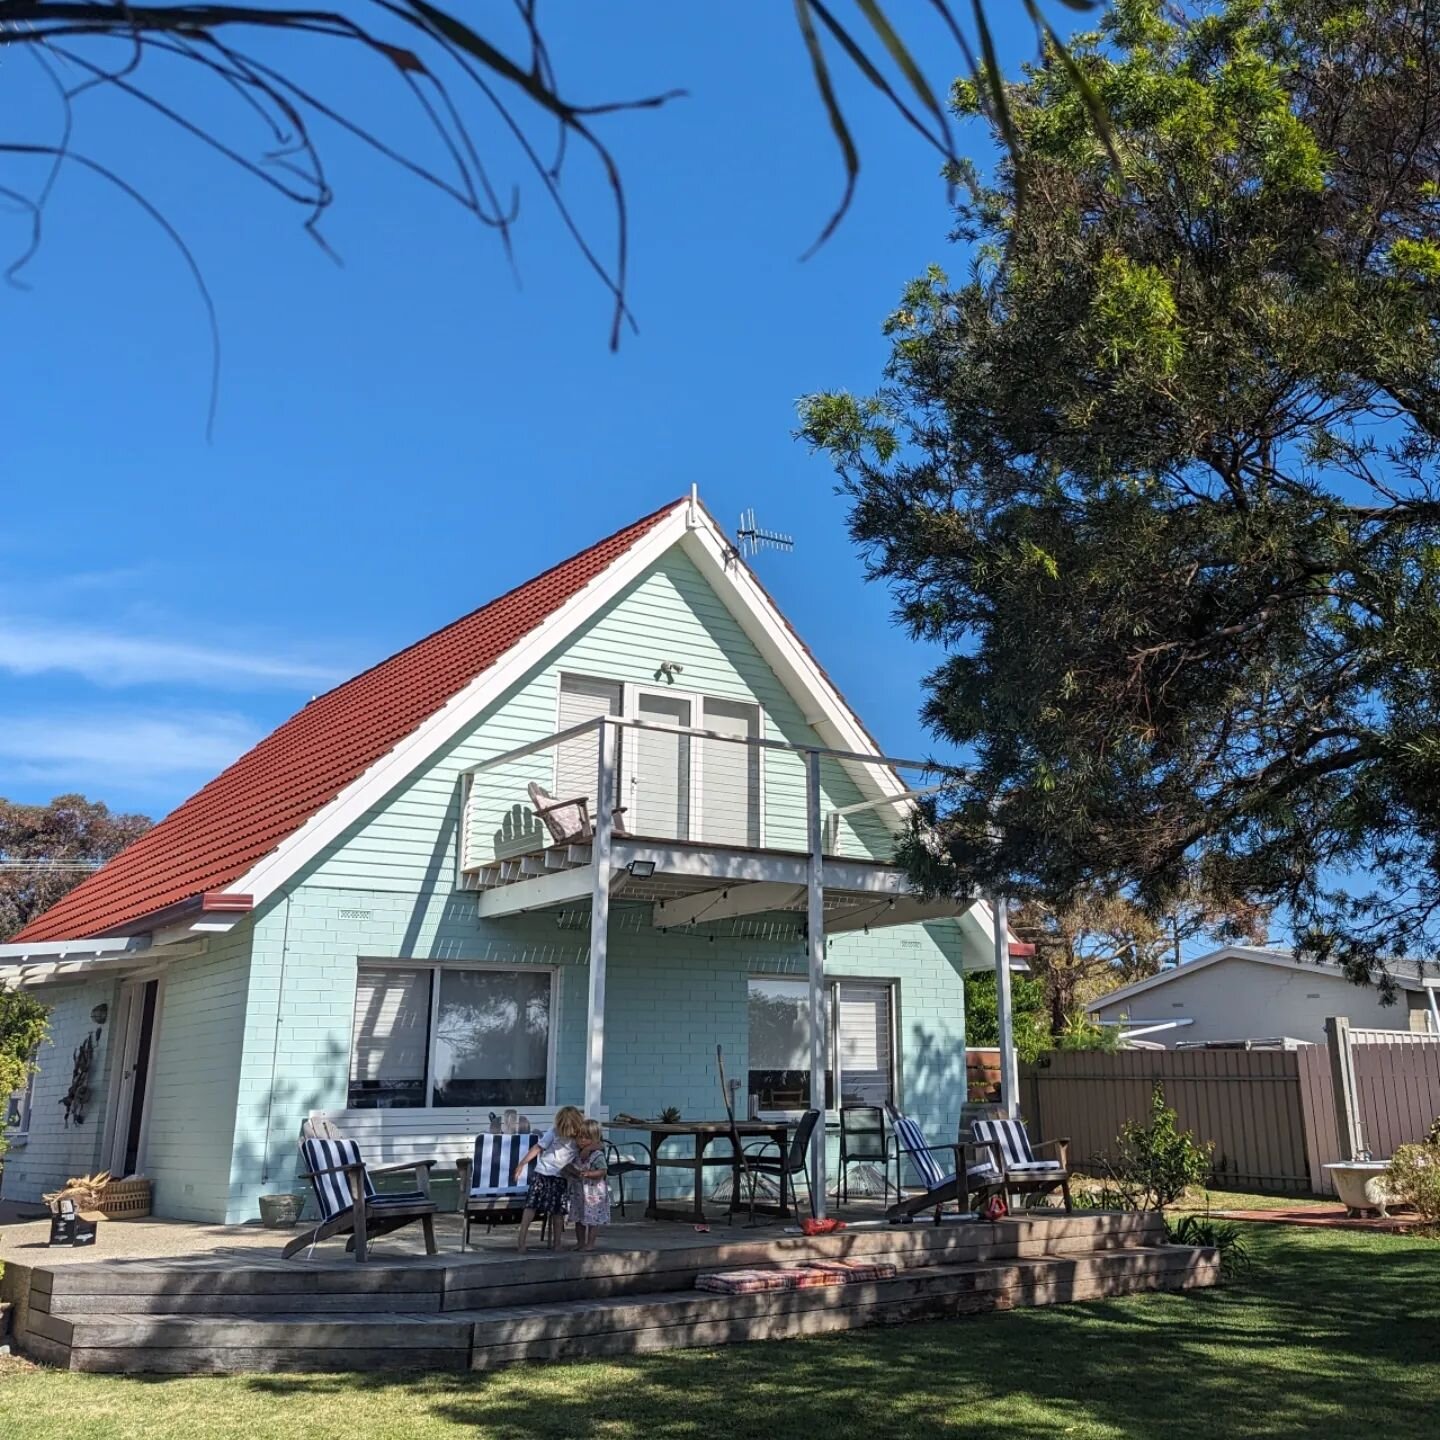 The end of an era! The cutest house in Normanville, the most solid, well built, oasis that has never ever let us down is up for sale. It went online today. I cried watching the video. We were babies in our 20's when we bought this house, we worked so